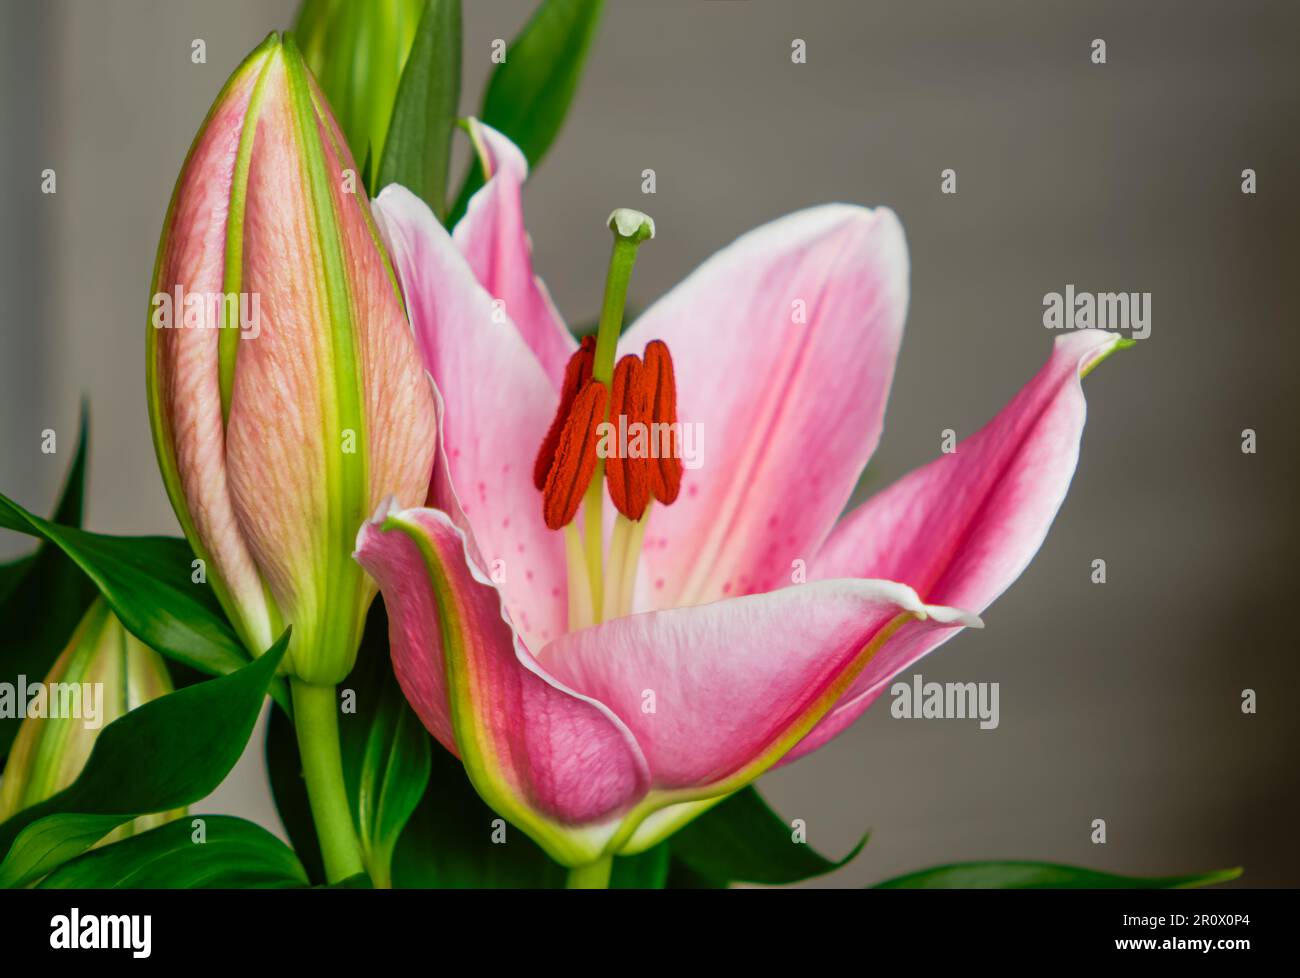 Asiatic lily,blooming colorful pink flower close up,decorative elegant petals,plant from the group of hybrids that originated from East Asian species Stock Photo